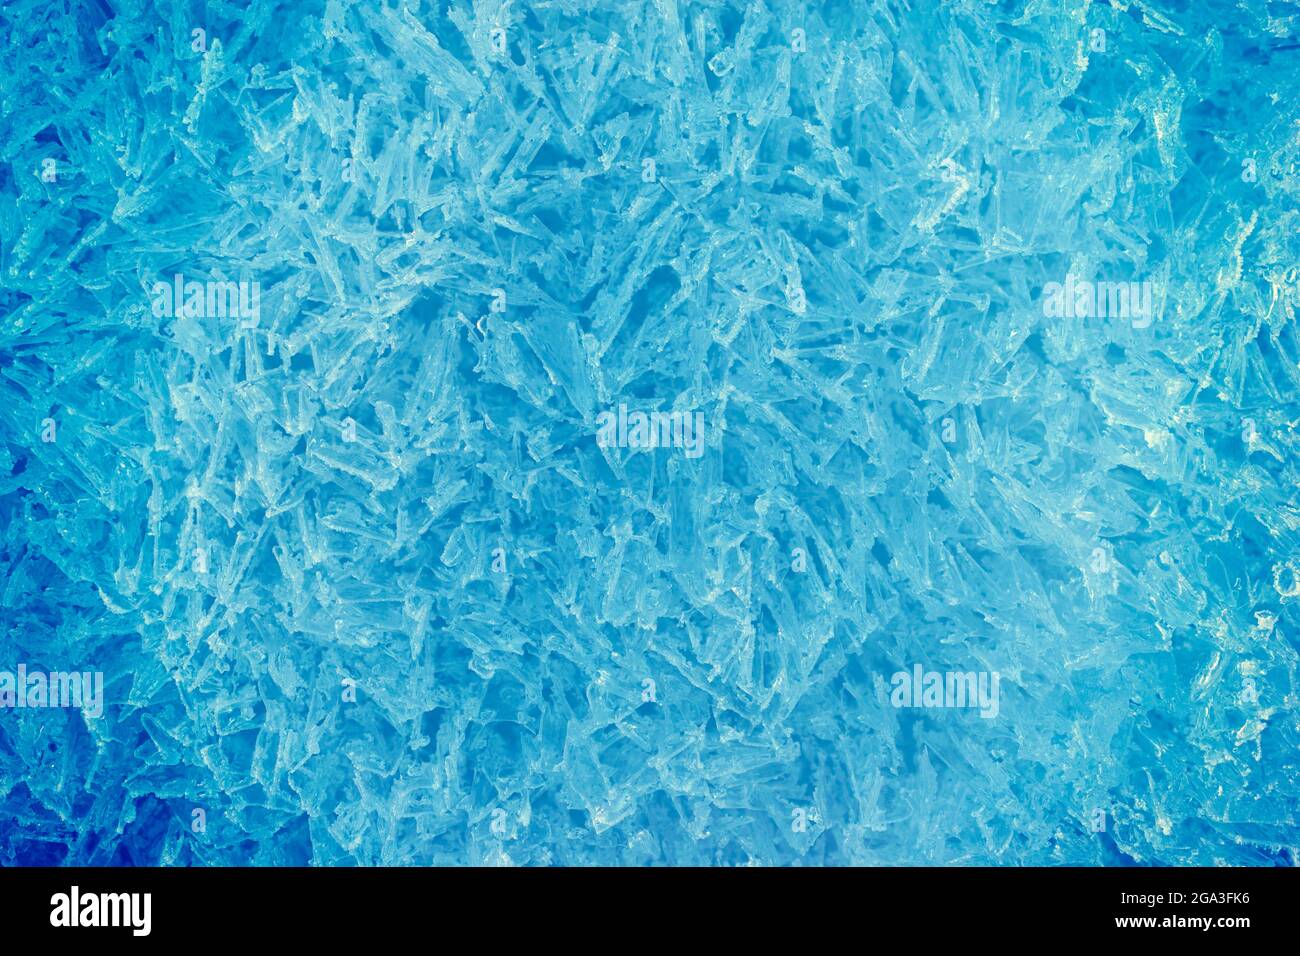 Cool blue bright background of frozen ice crystals. Stock Photo